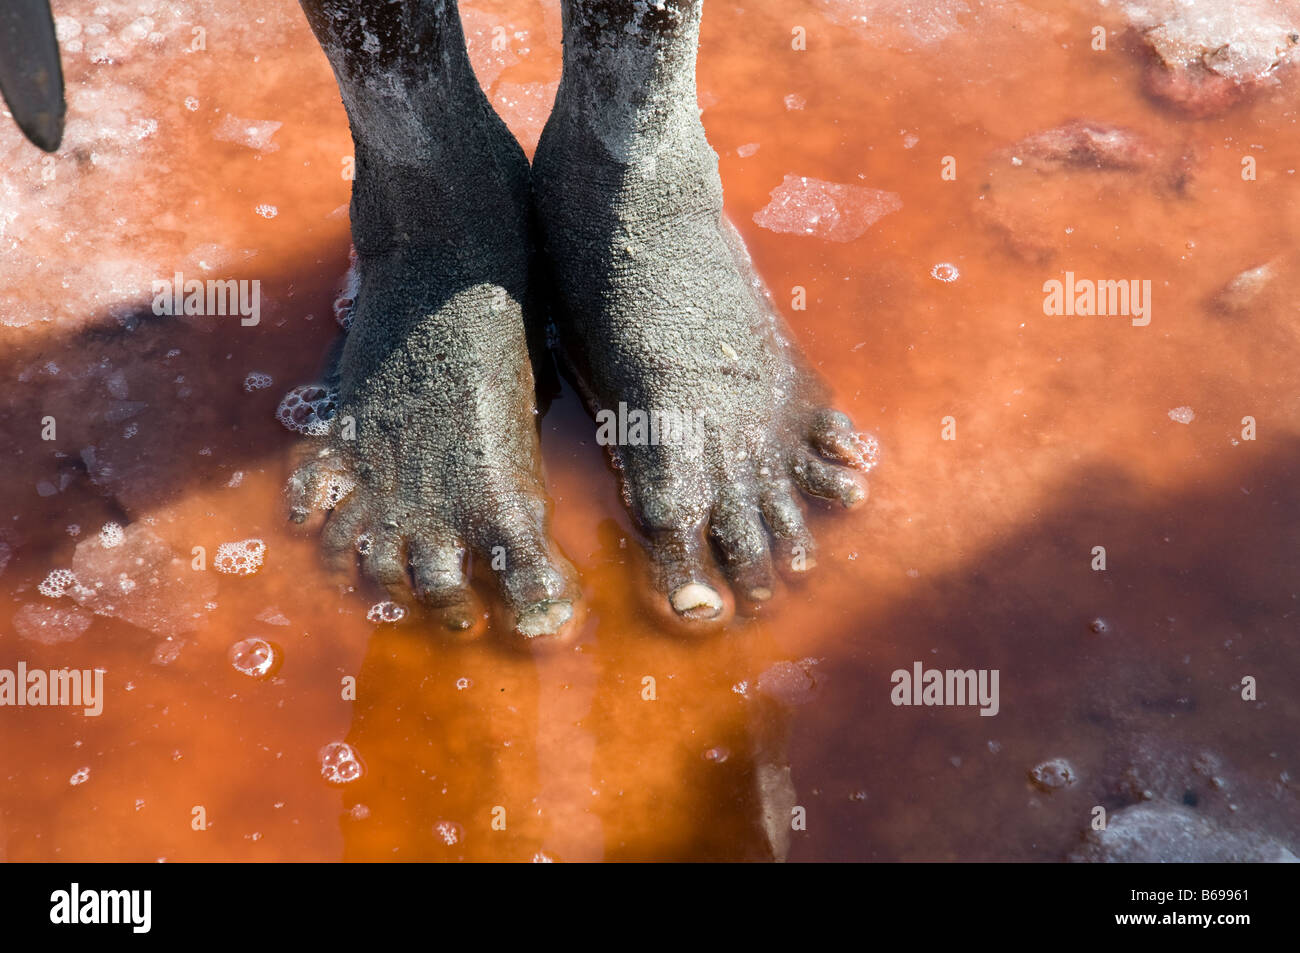 Soda extraction at Lake Natron in Tanzania feet of a Maasai standing in the  salt water Stock Photo - Alamy